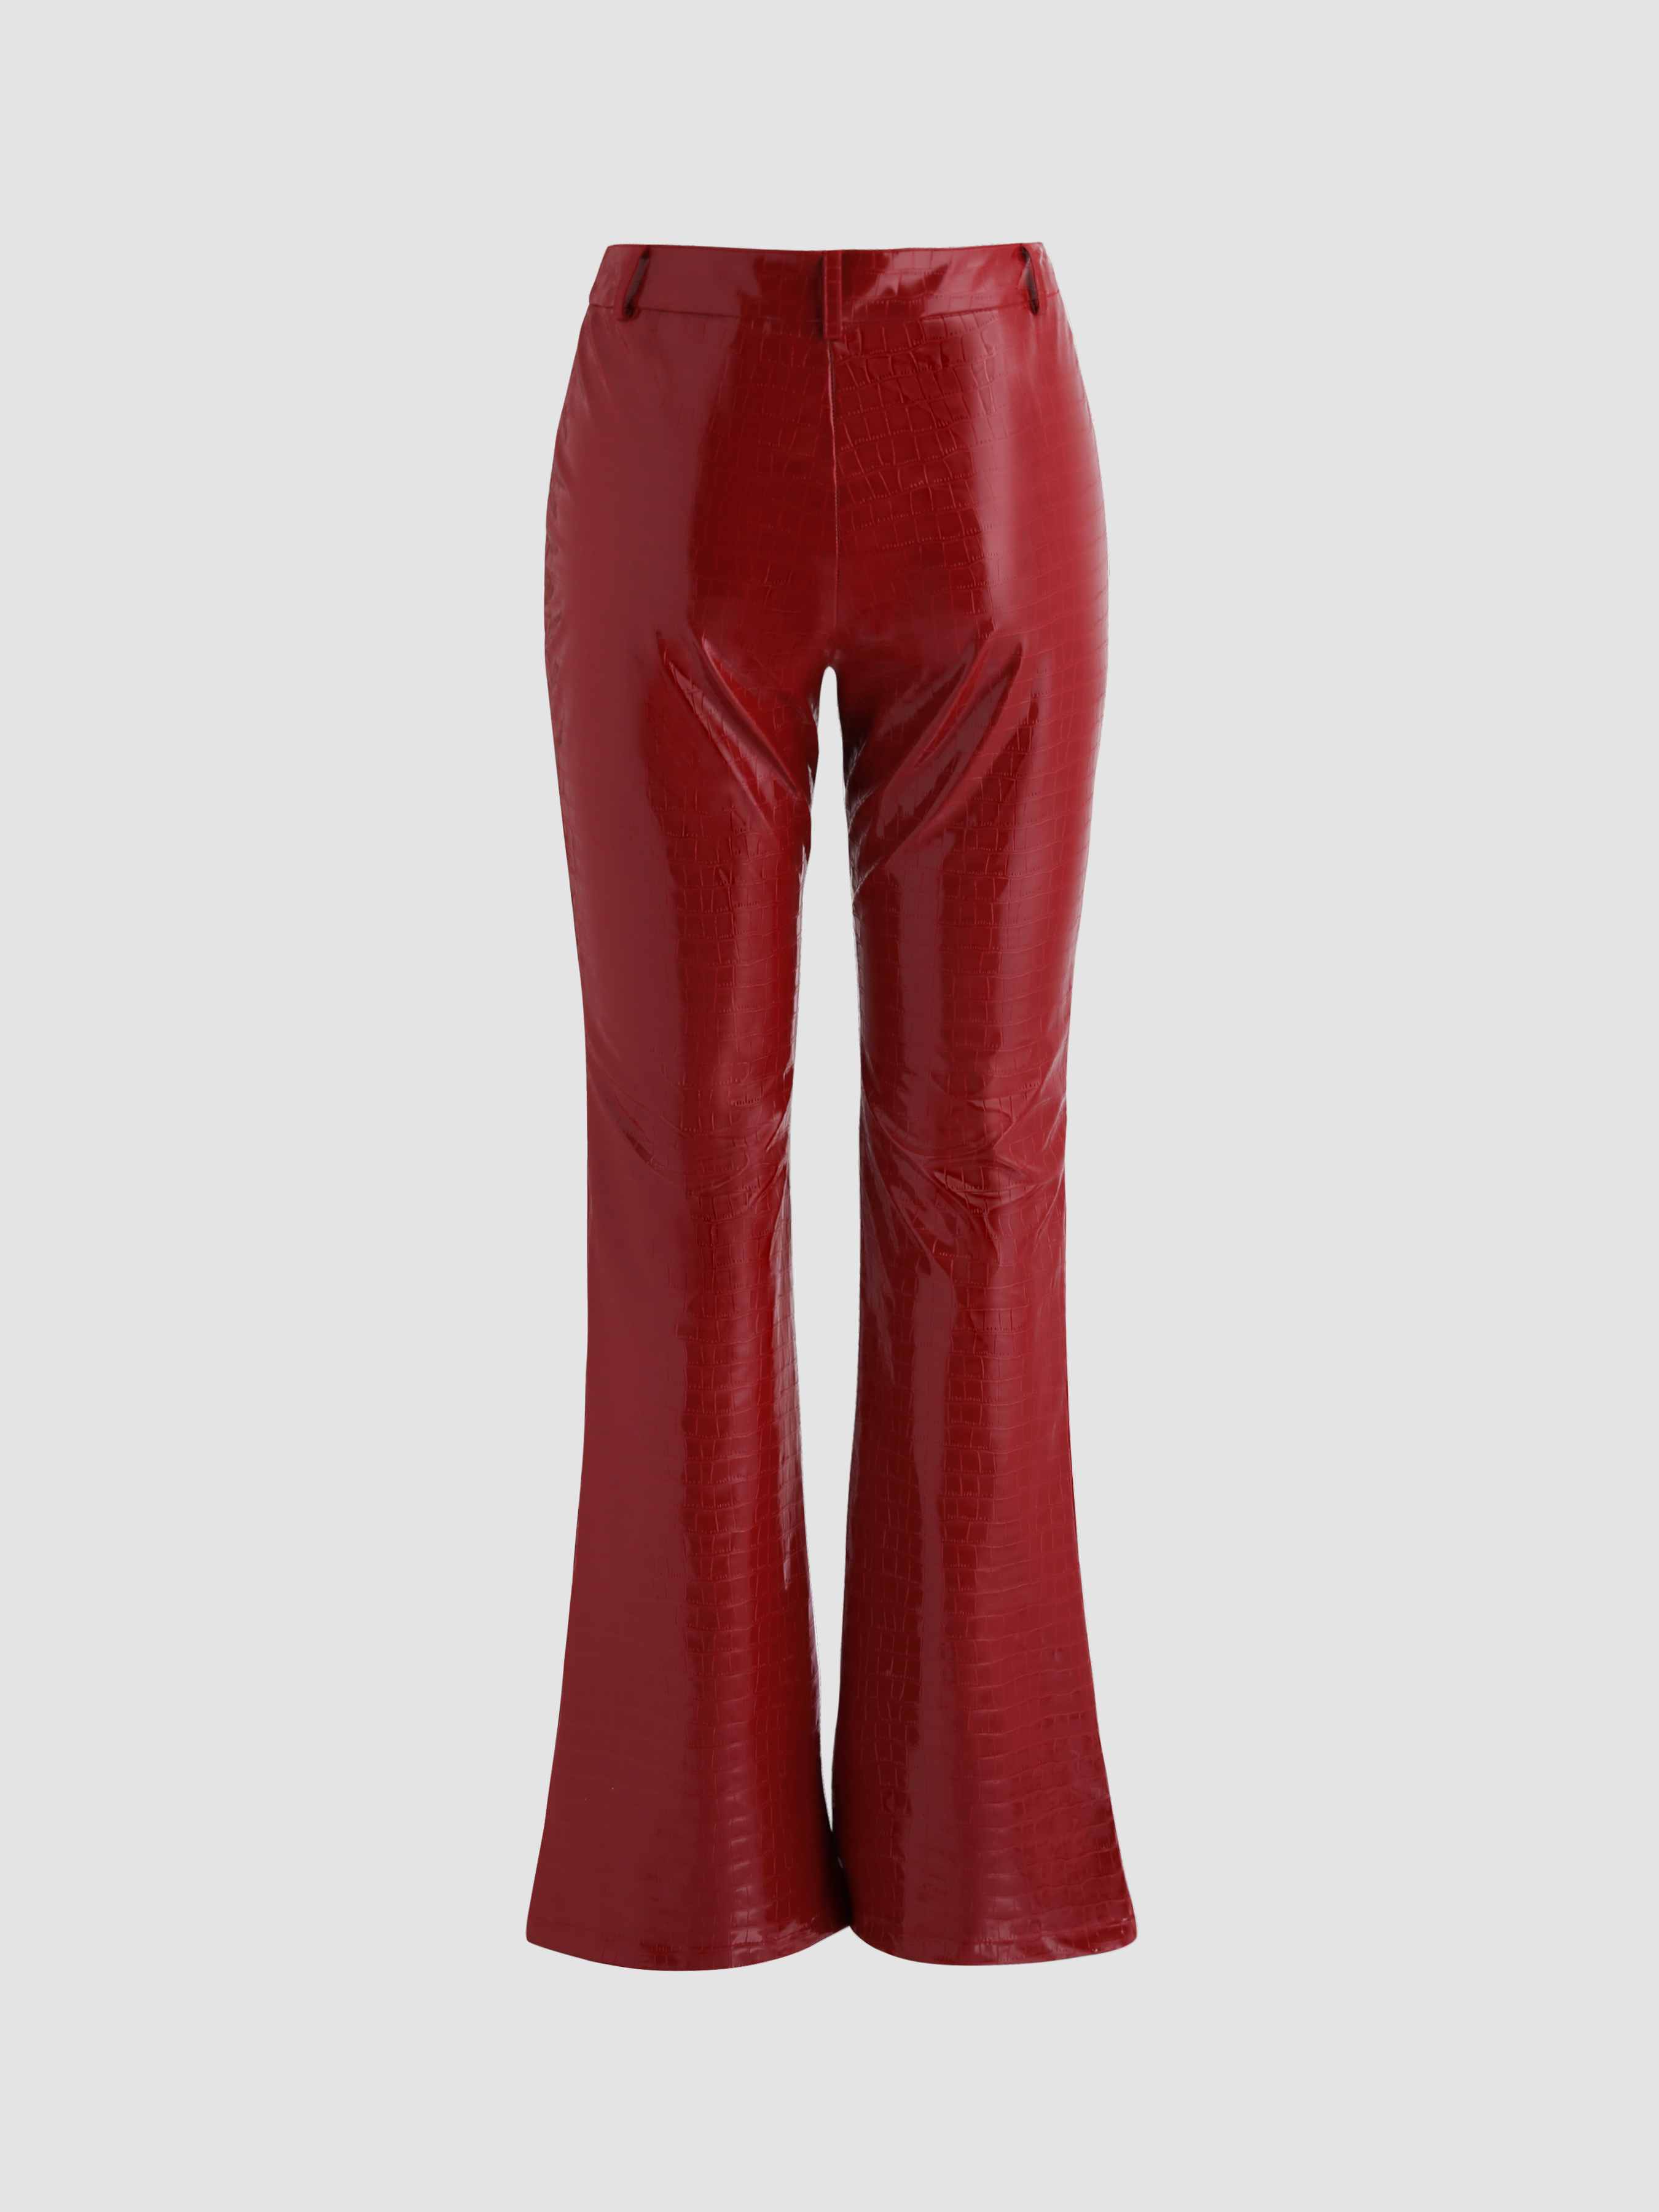 Cherry Red Faux Crocodile Leather Pants - Cider